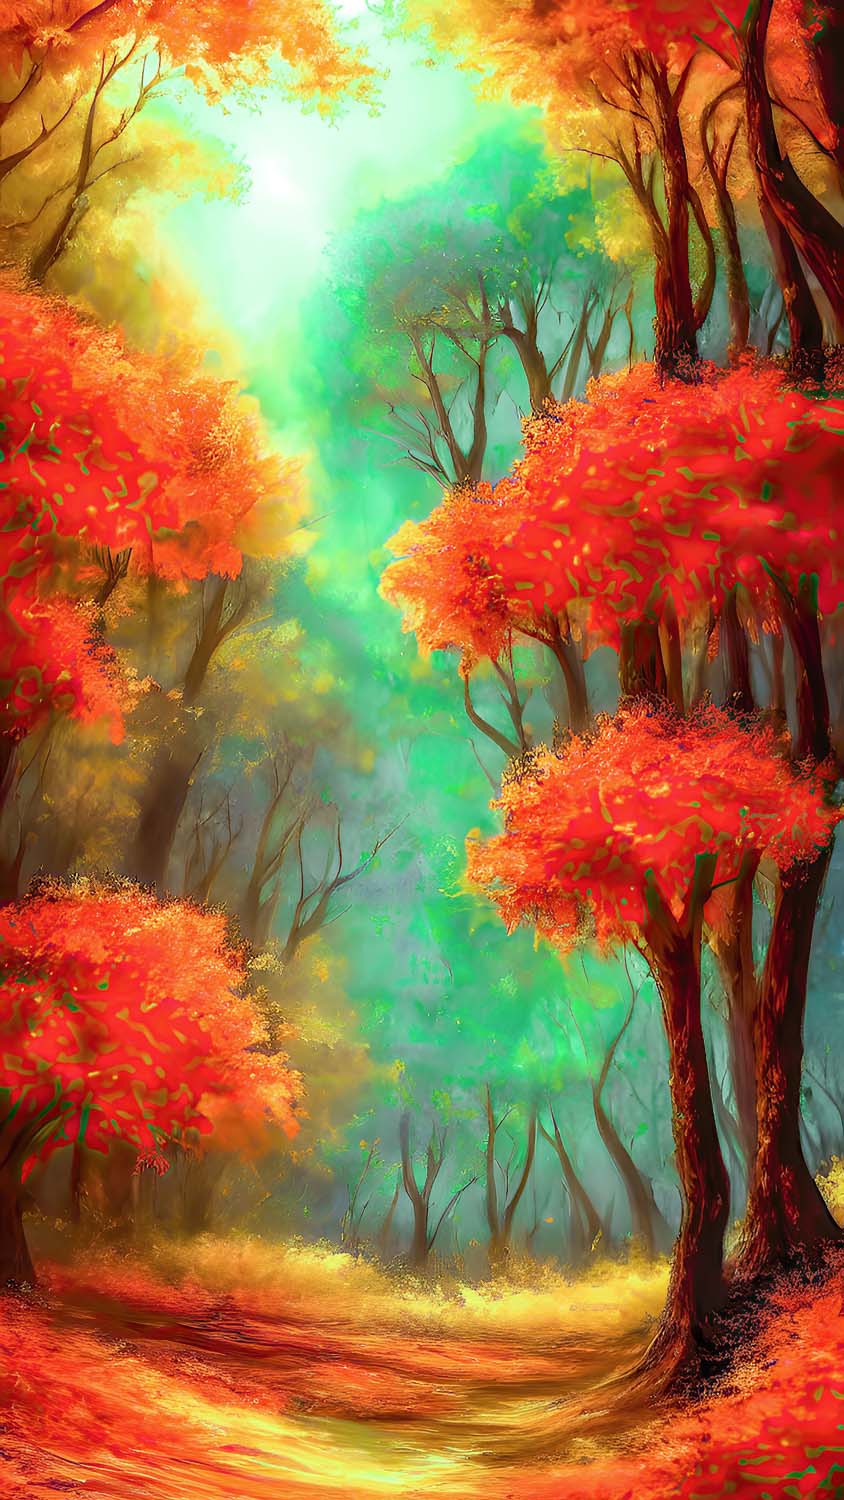 Autumn Forest Art Painting iPhone Wallpaper HD